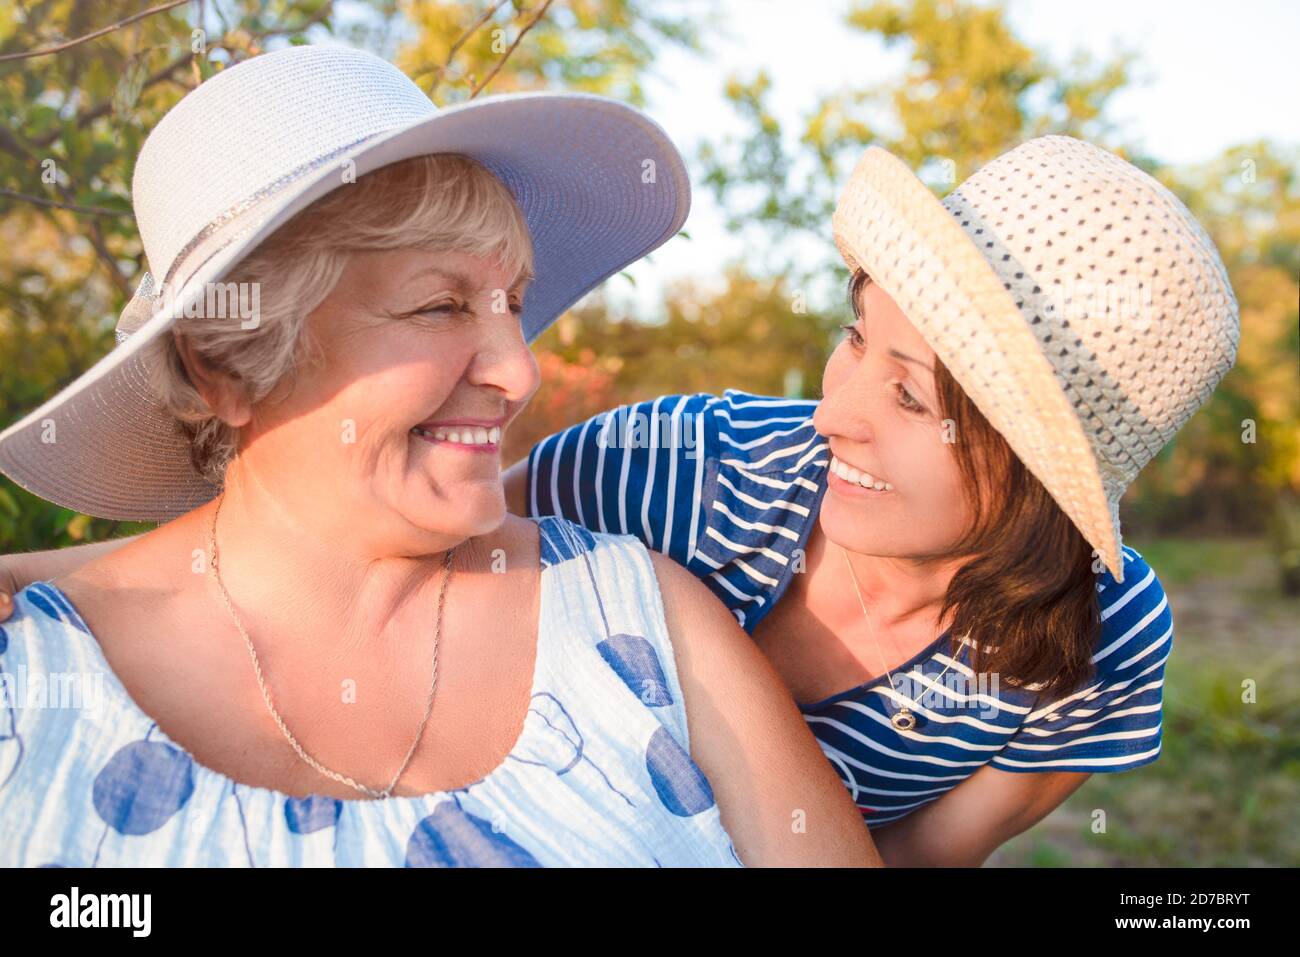 Happy daughter embracing her smiling mother. Stock Photo